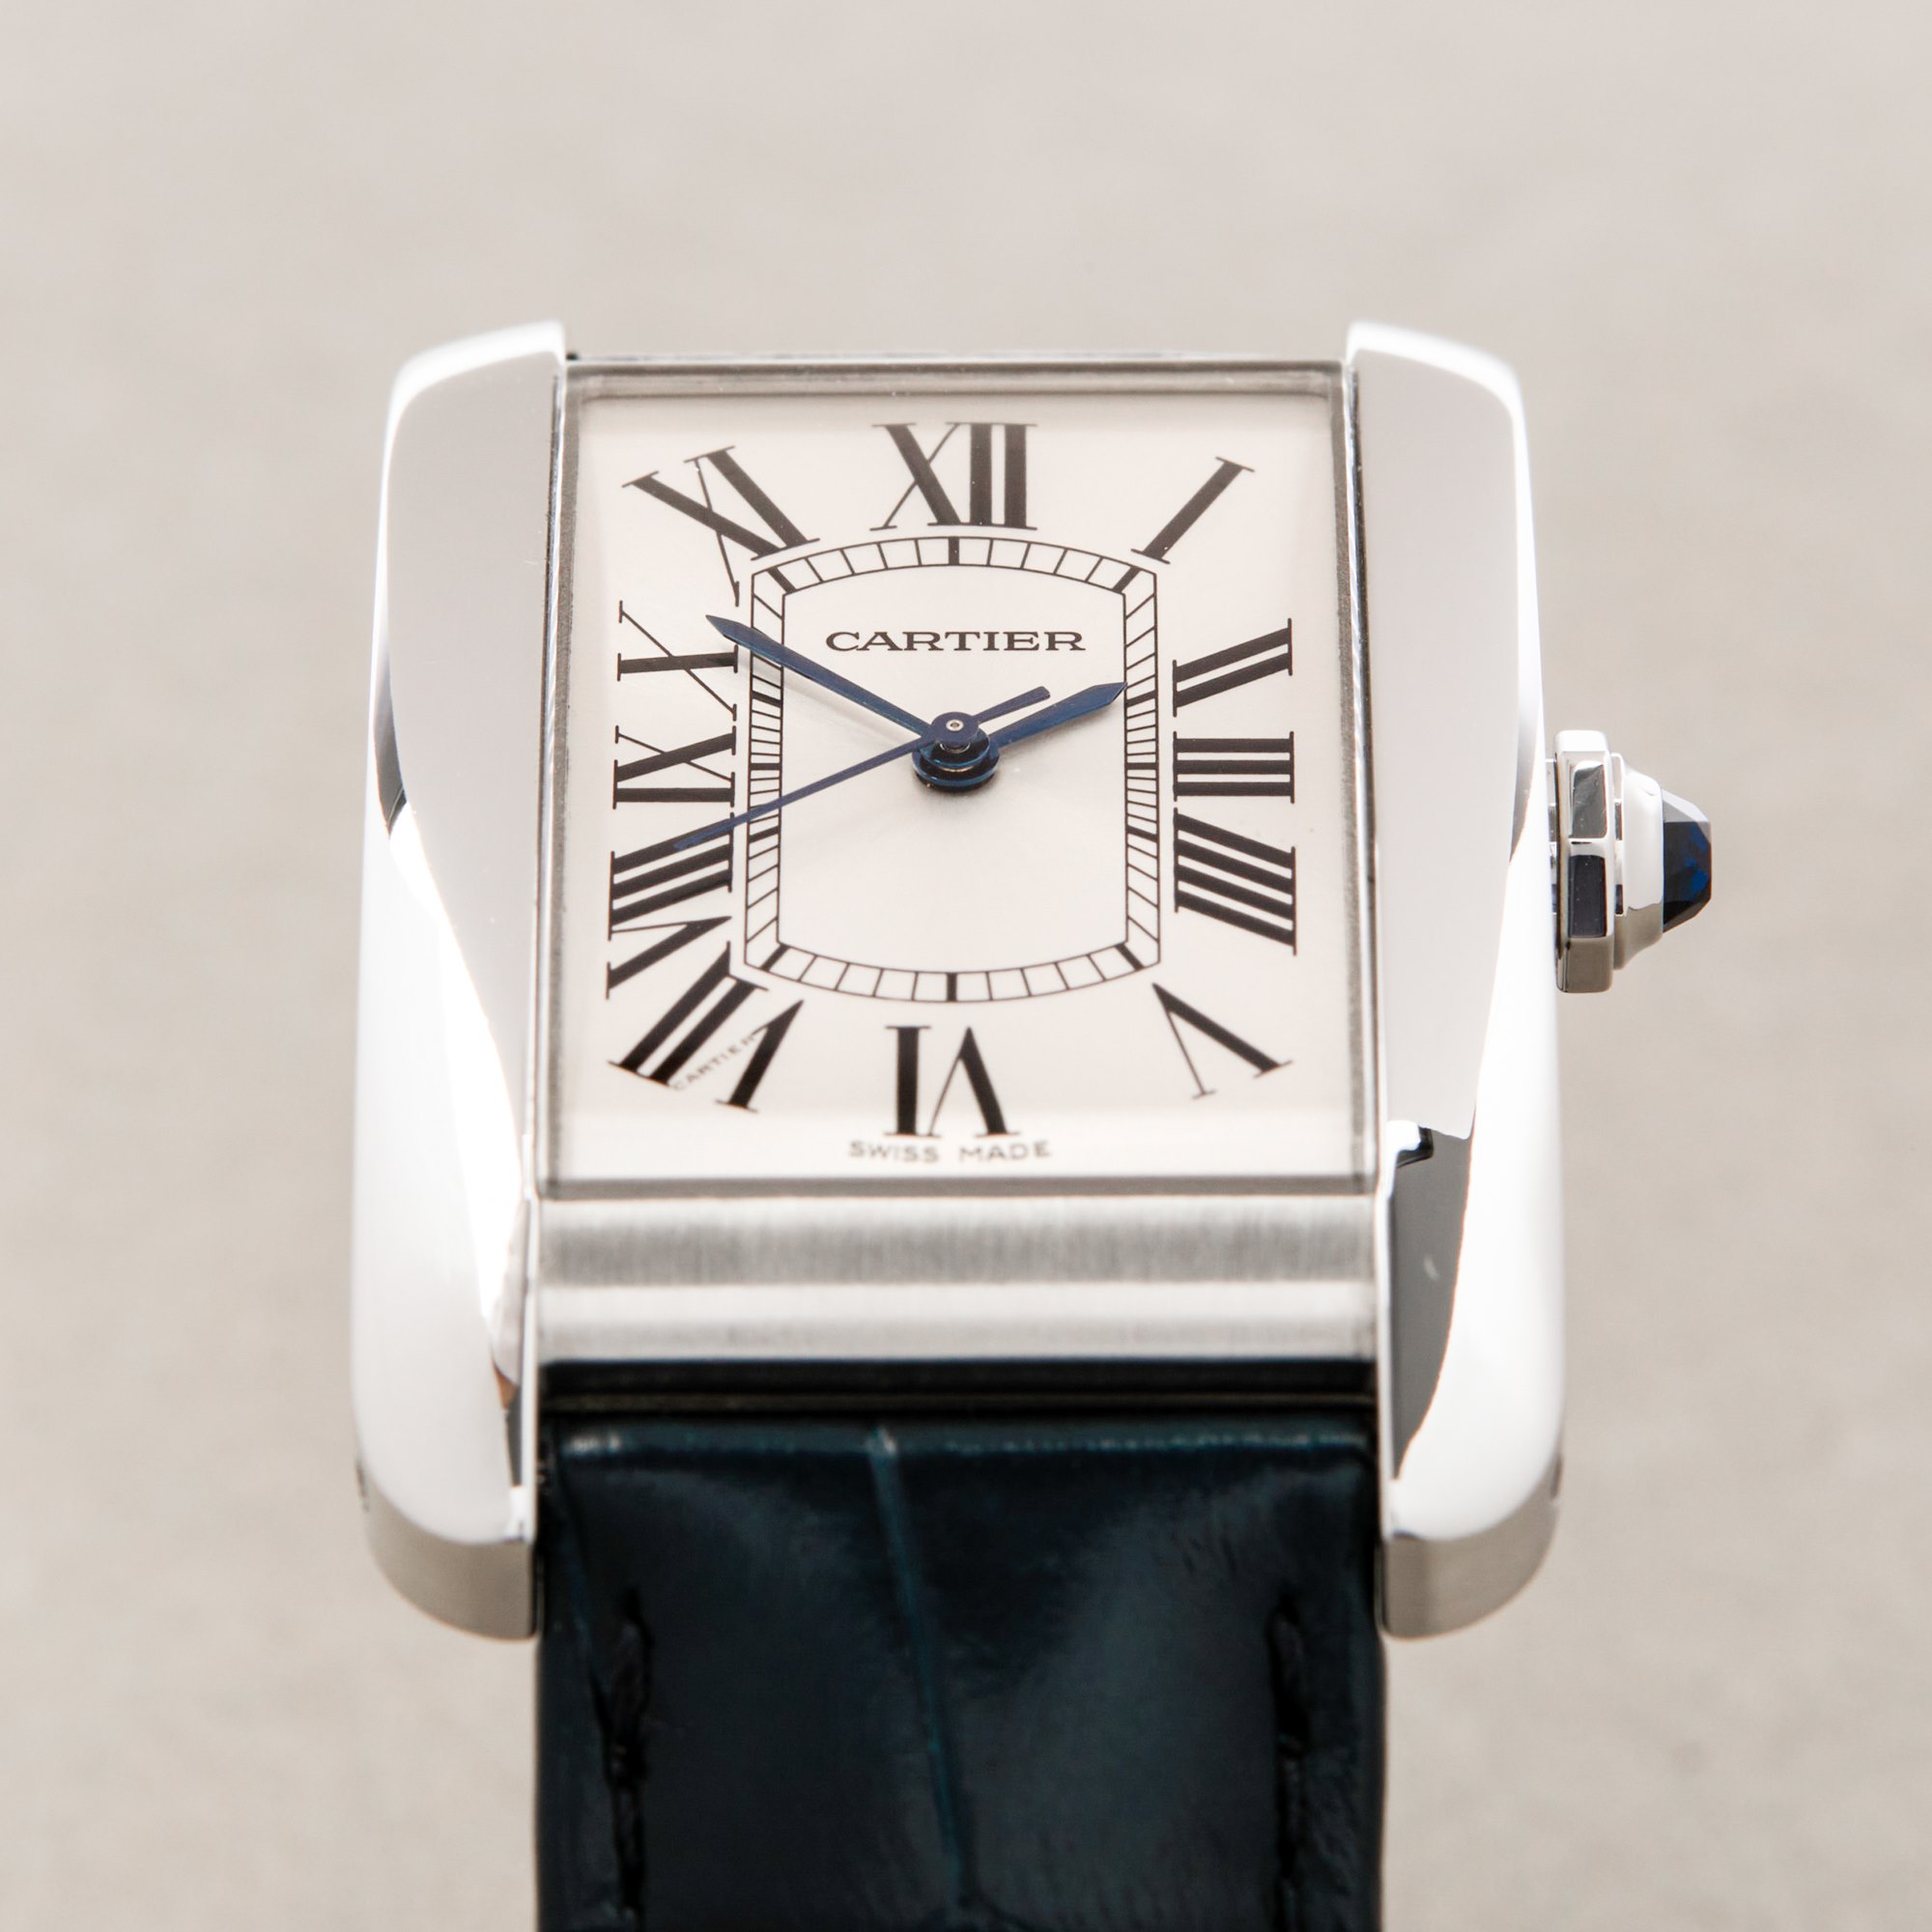 Cartier Tank Americaine Roestvrij Staal WSTA0018 or 3972